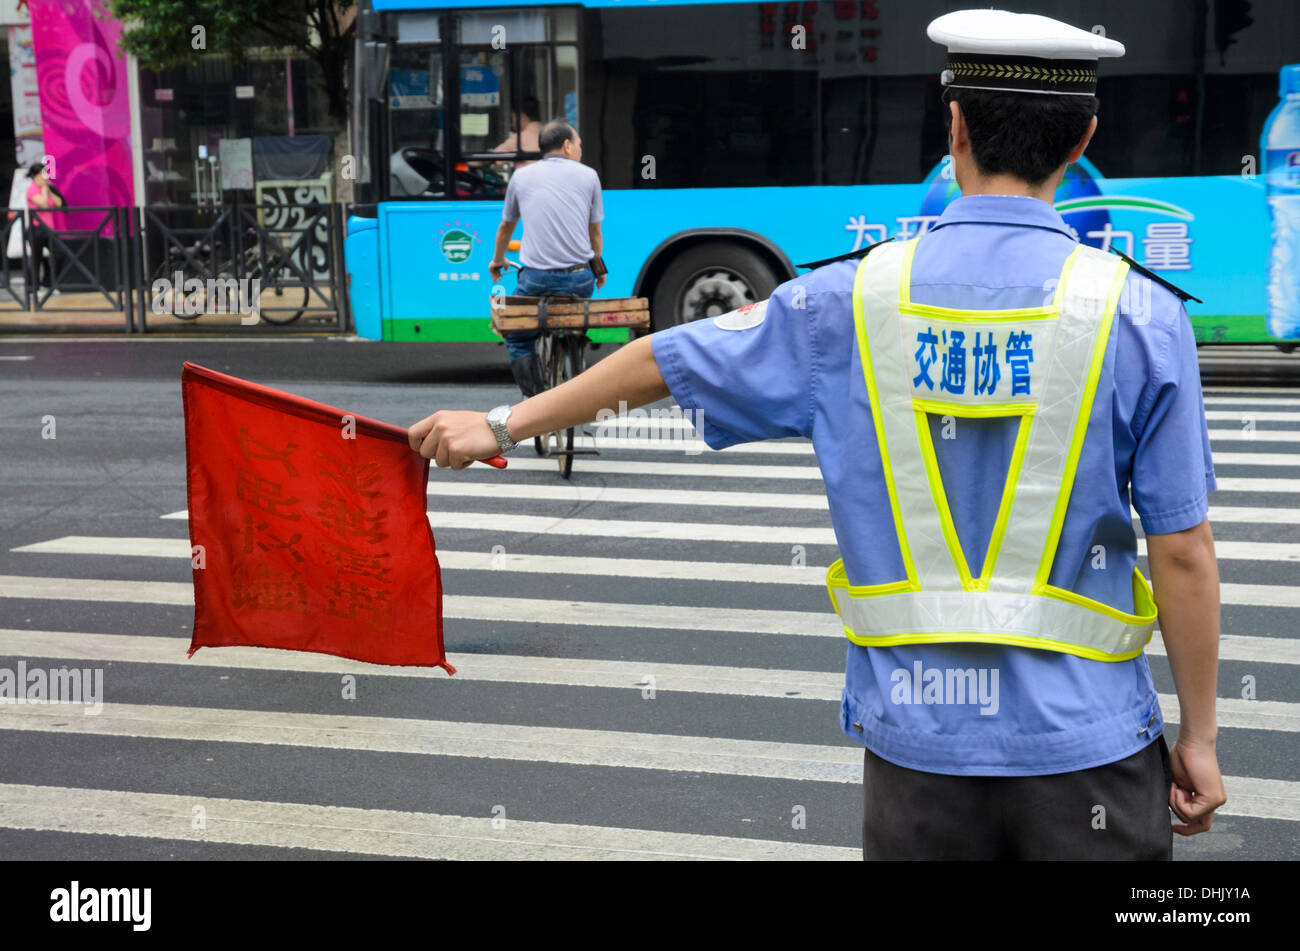 Road safety in China: Policeman directing traffic and pedestrians at a large intersection. Stock Photo